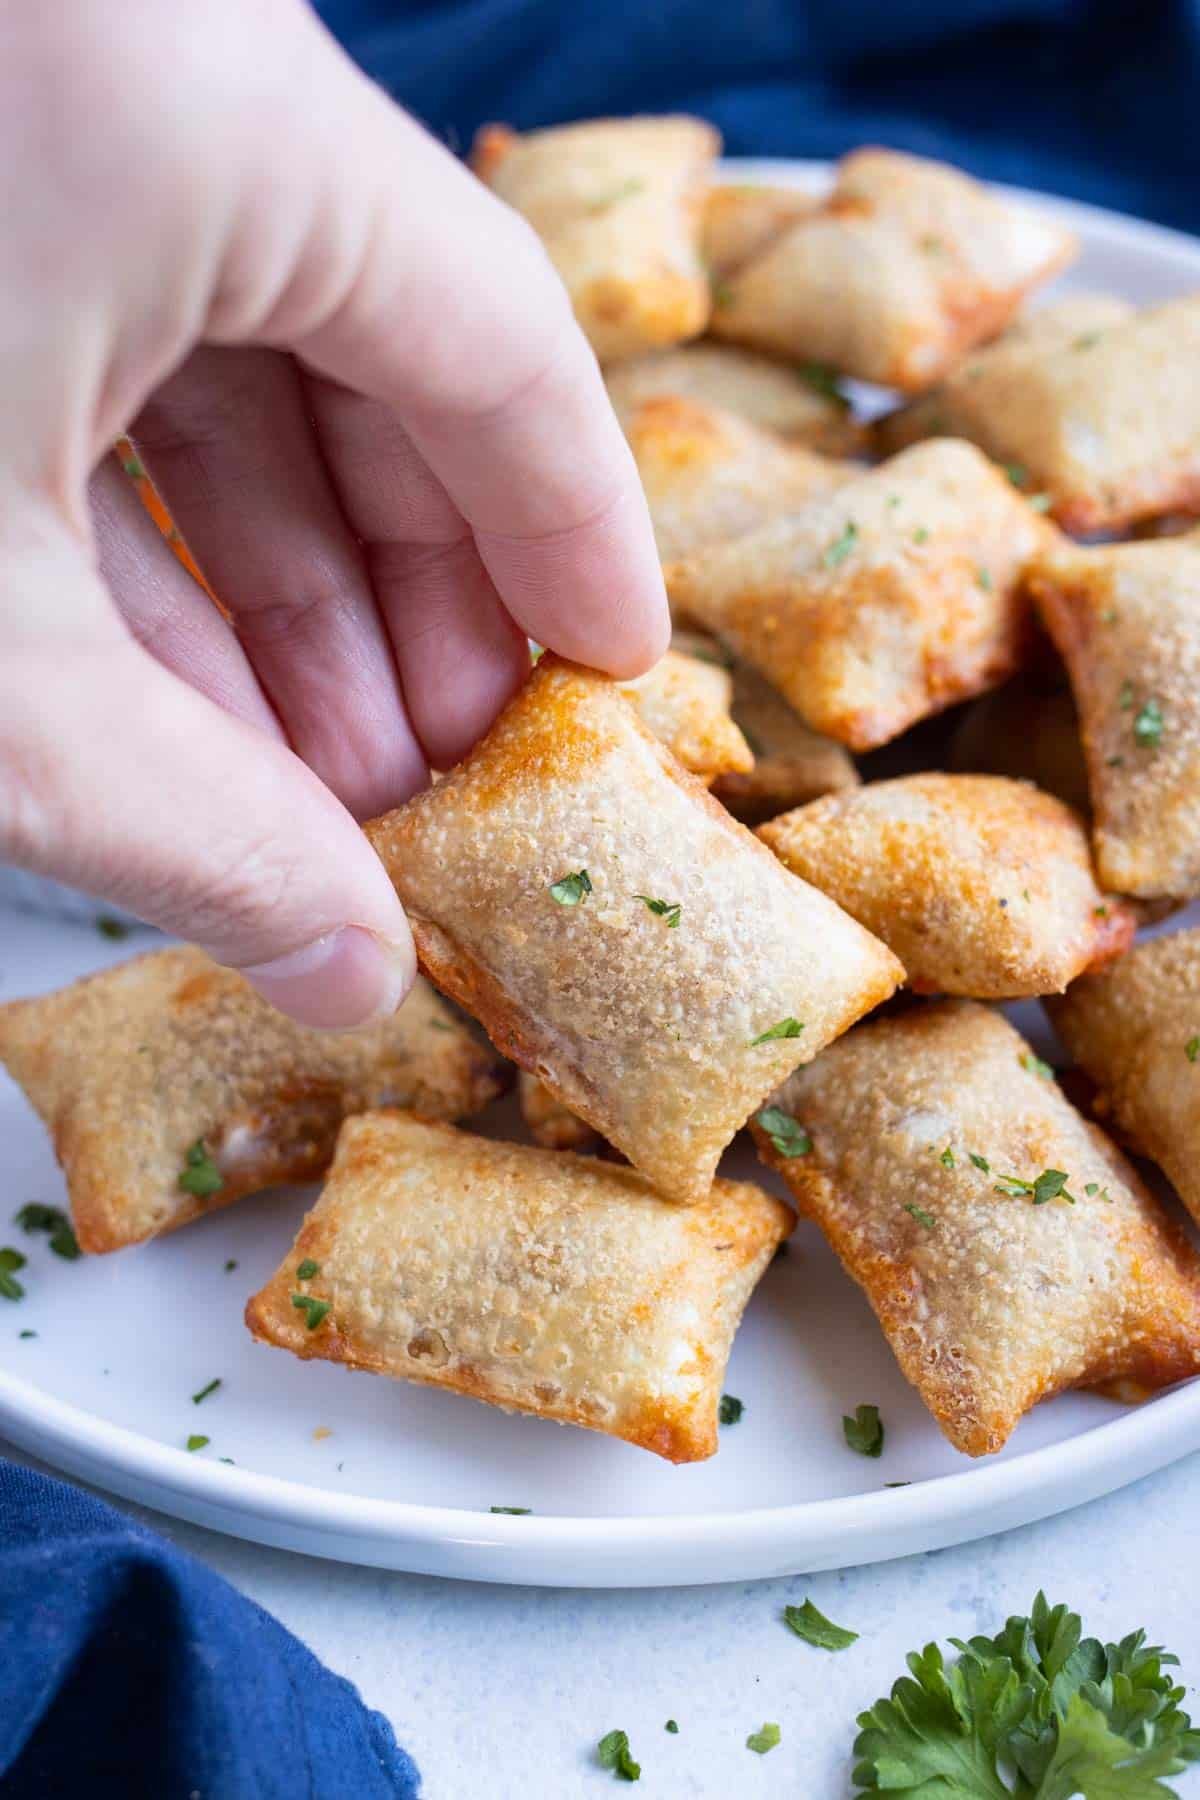 A hand picks up a pizza roll cooked in the air fryer.